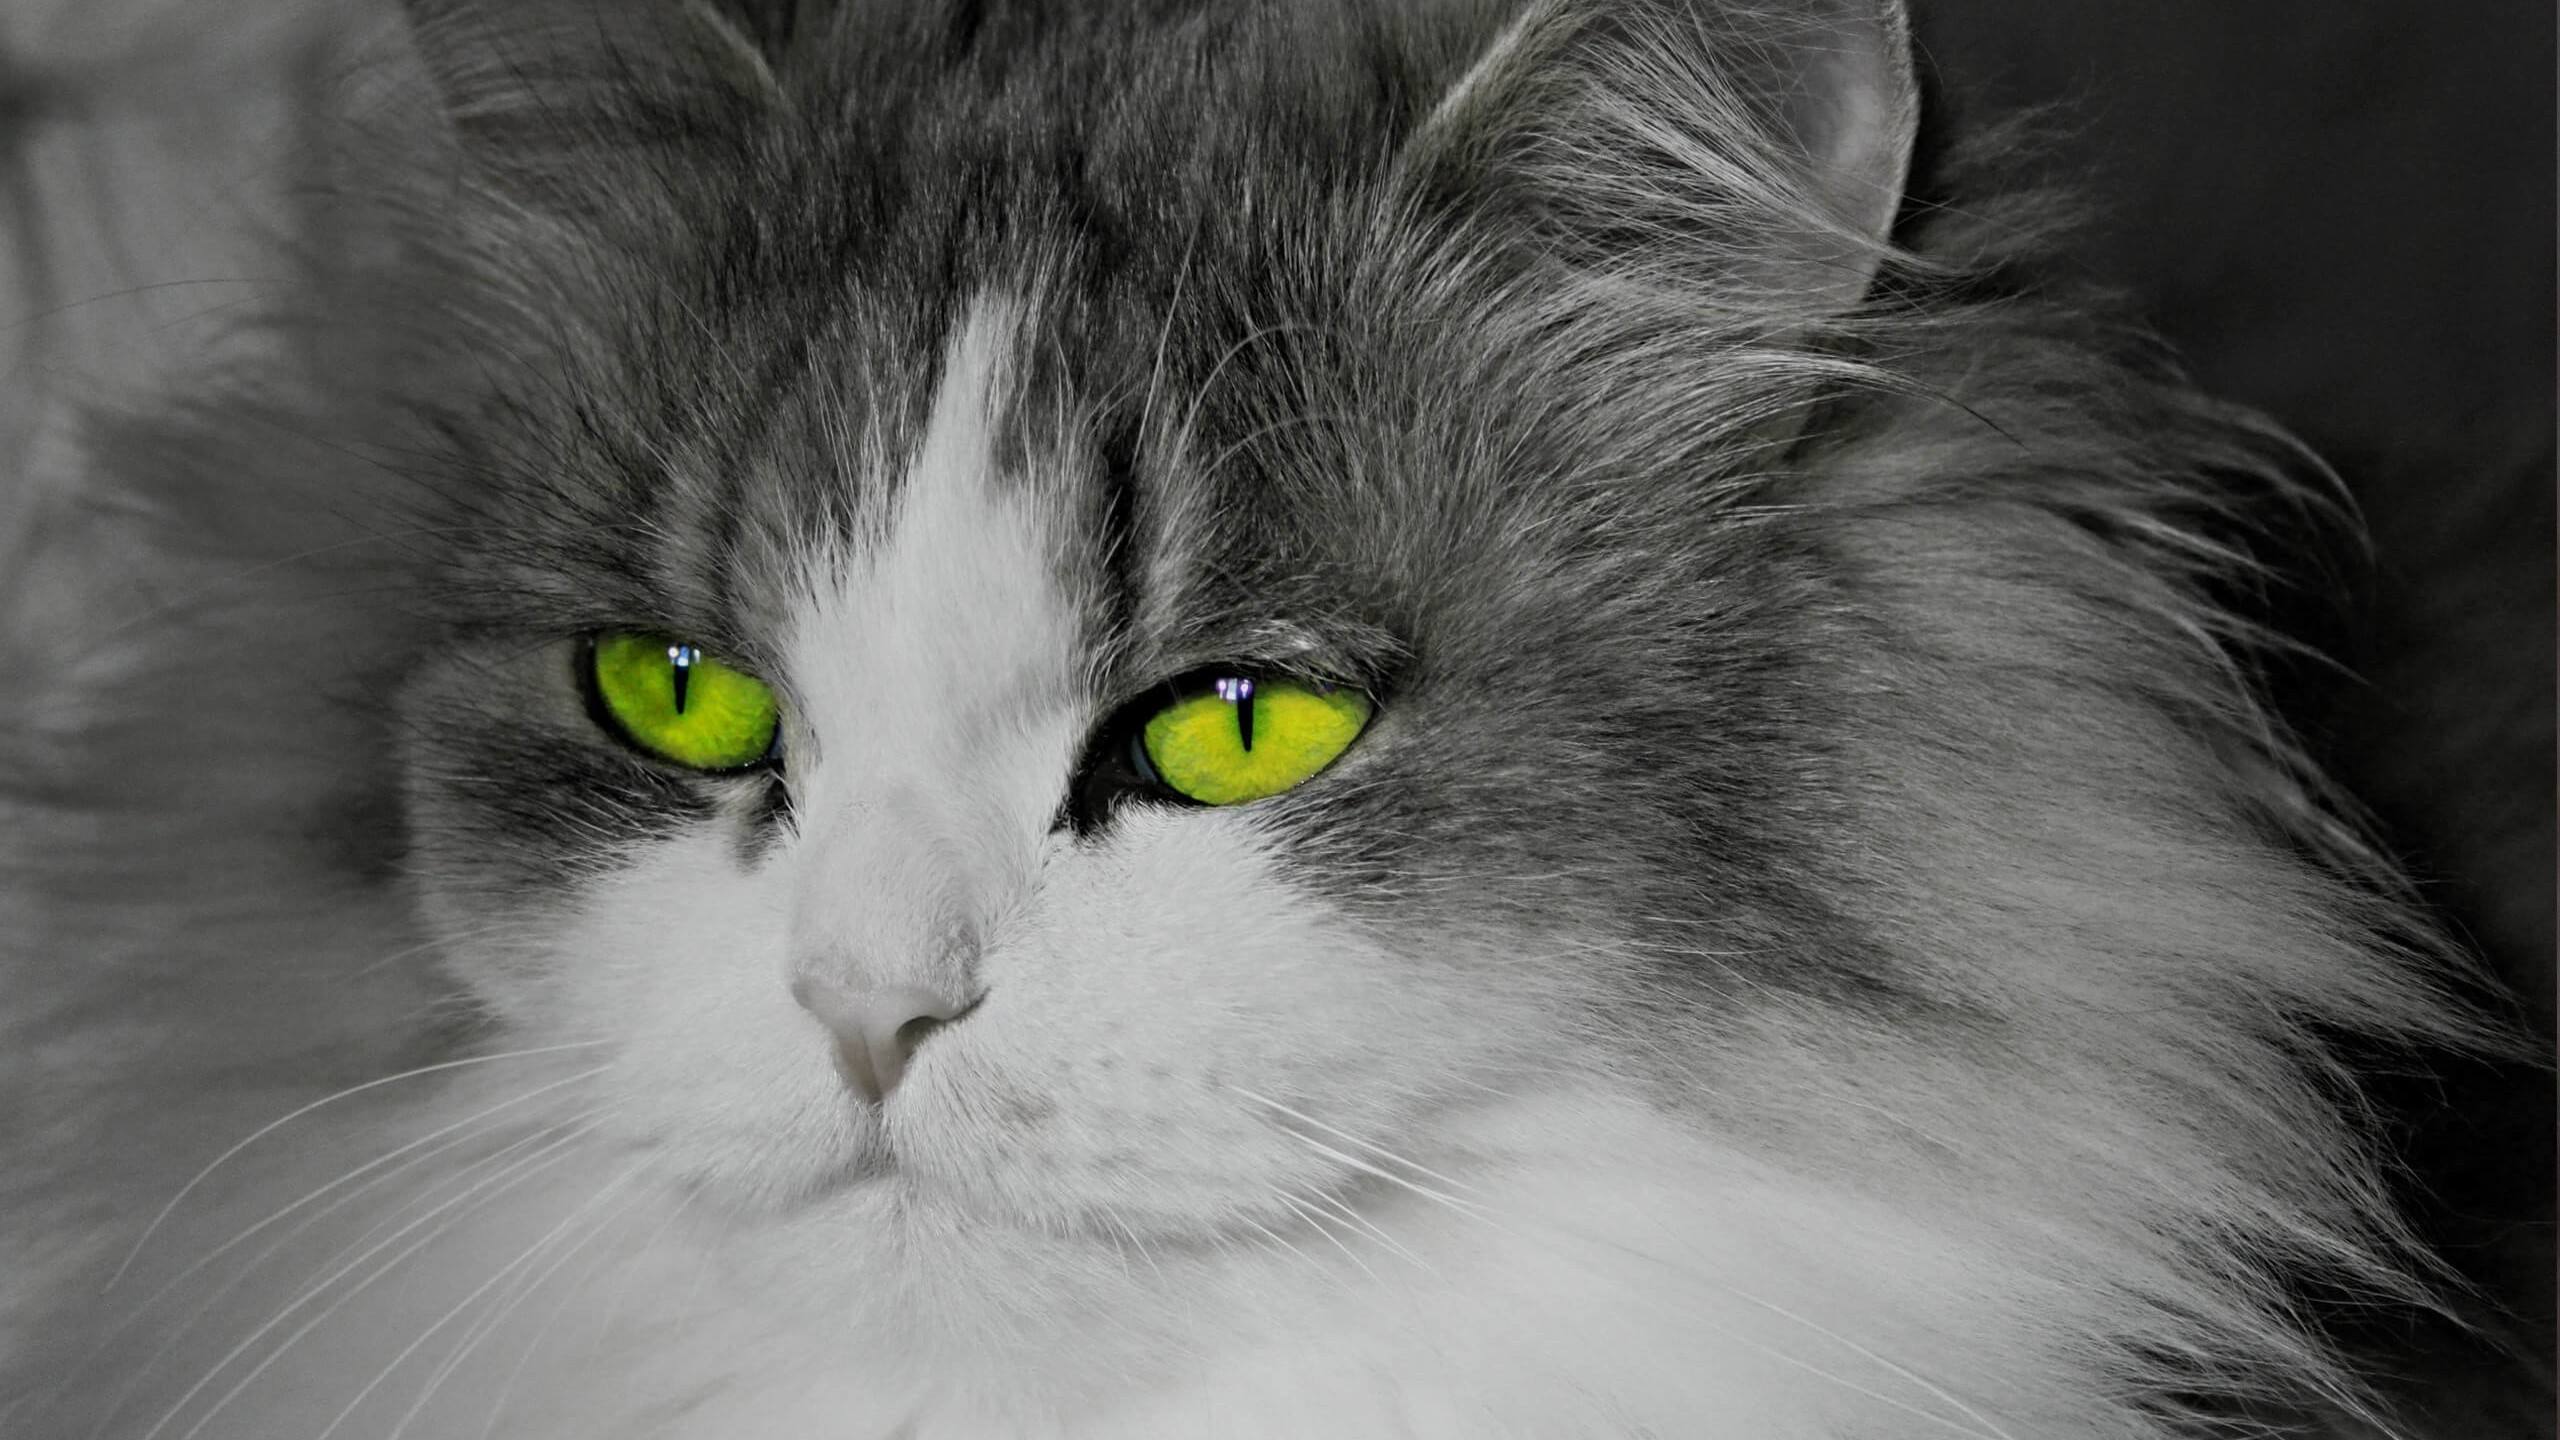 Cat With Stunningly Green Eyes Wallpaper for Social Media YouTube Channel Art